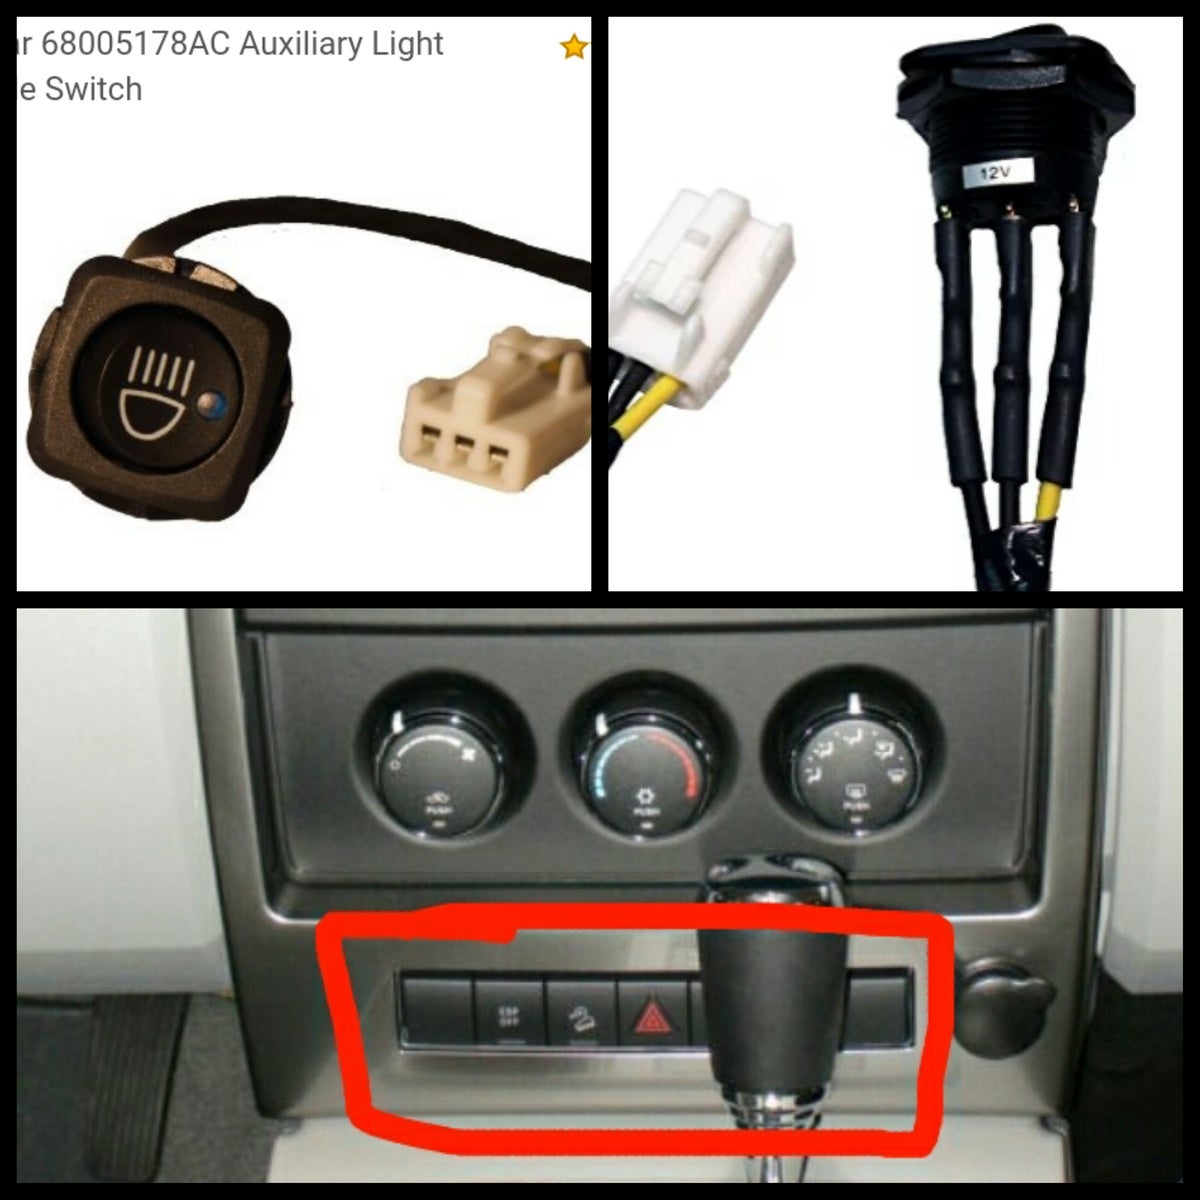 Jeep Liberty Questions - Can I install an aftermarket fog light toggle 2008 Jeep Liberty Hazard Lights Not Working